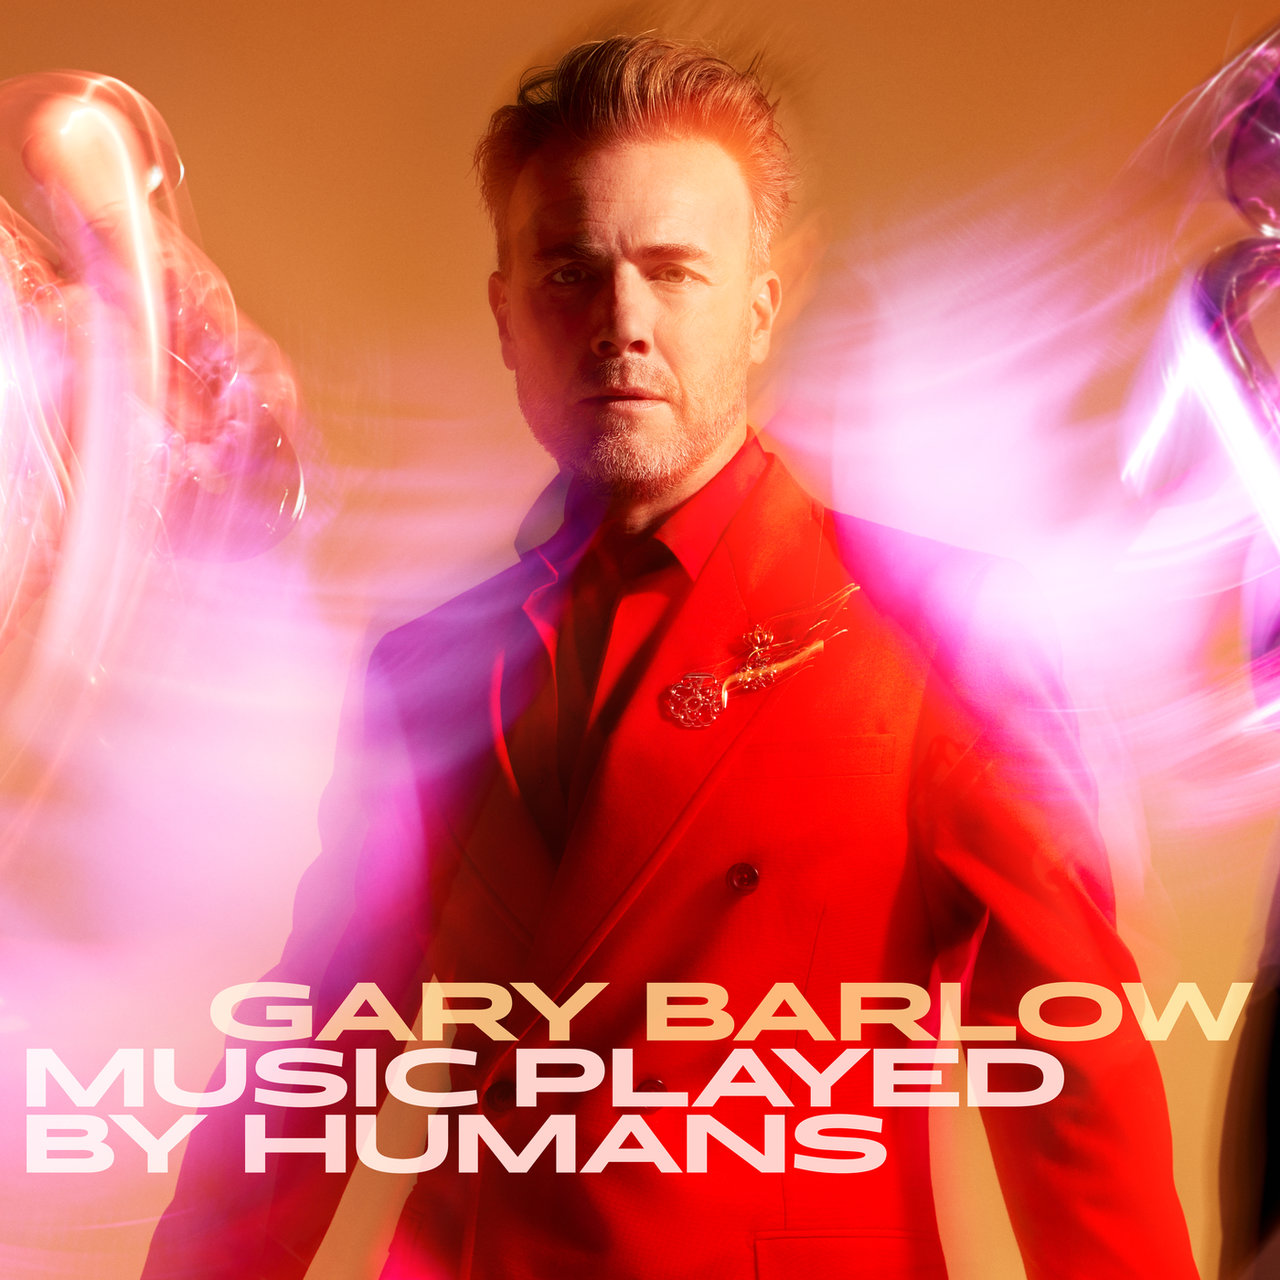 Gary Barlow - Music Played By Humans (Deluxe) (2020) [FLAC 24bit/44,1kHz]